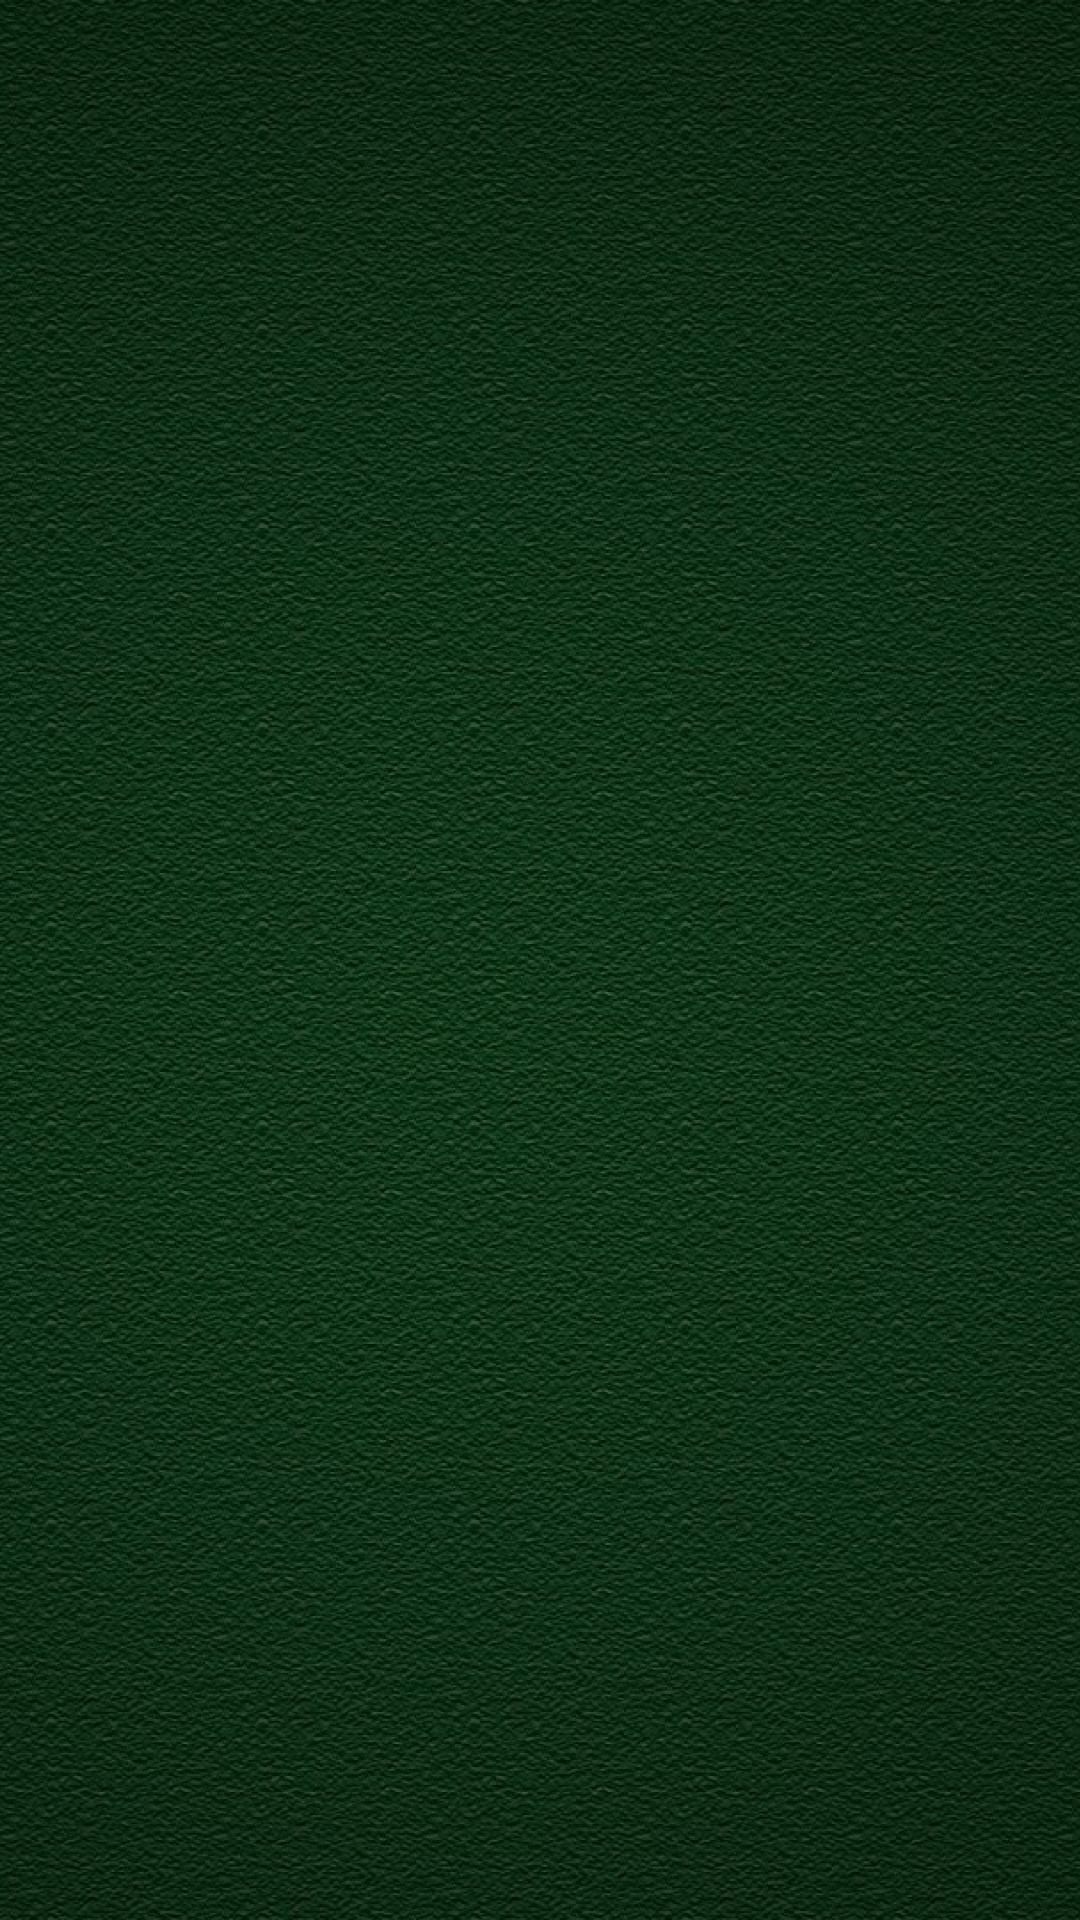 Free download Dark Green Textures Wallpaper 540x960 Photo Shared By [1080x1920] for your Desktop, Mobile & Tablet. Explore Green Texture Wallpaper. Texture Wallpaper, Wallpaper Texture, Texture Wallpaper